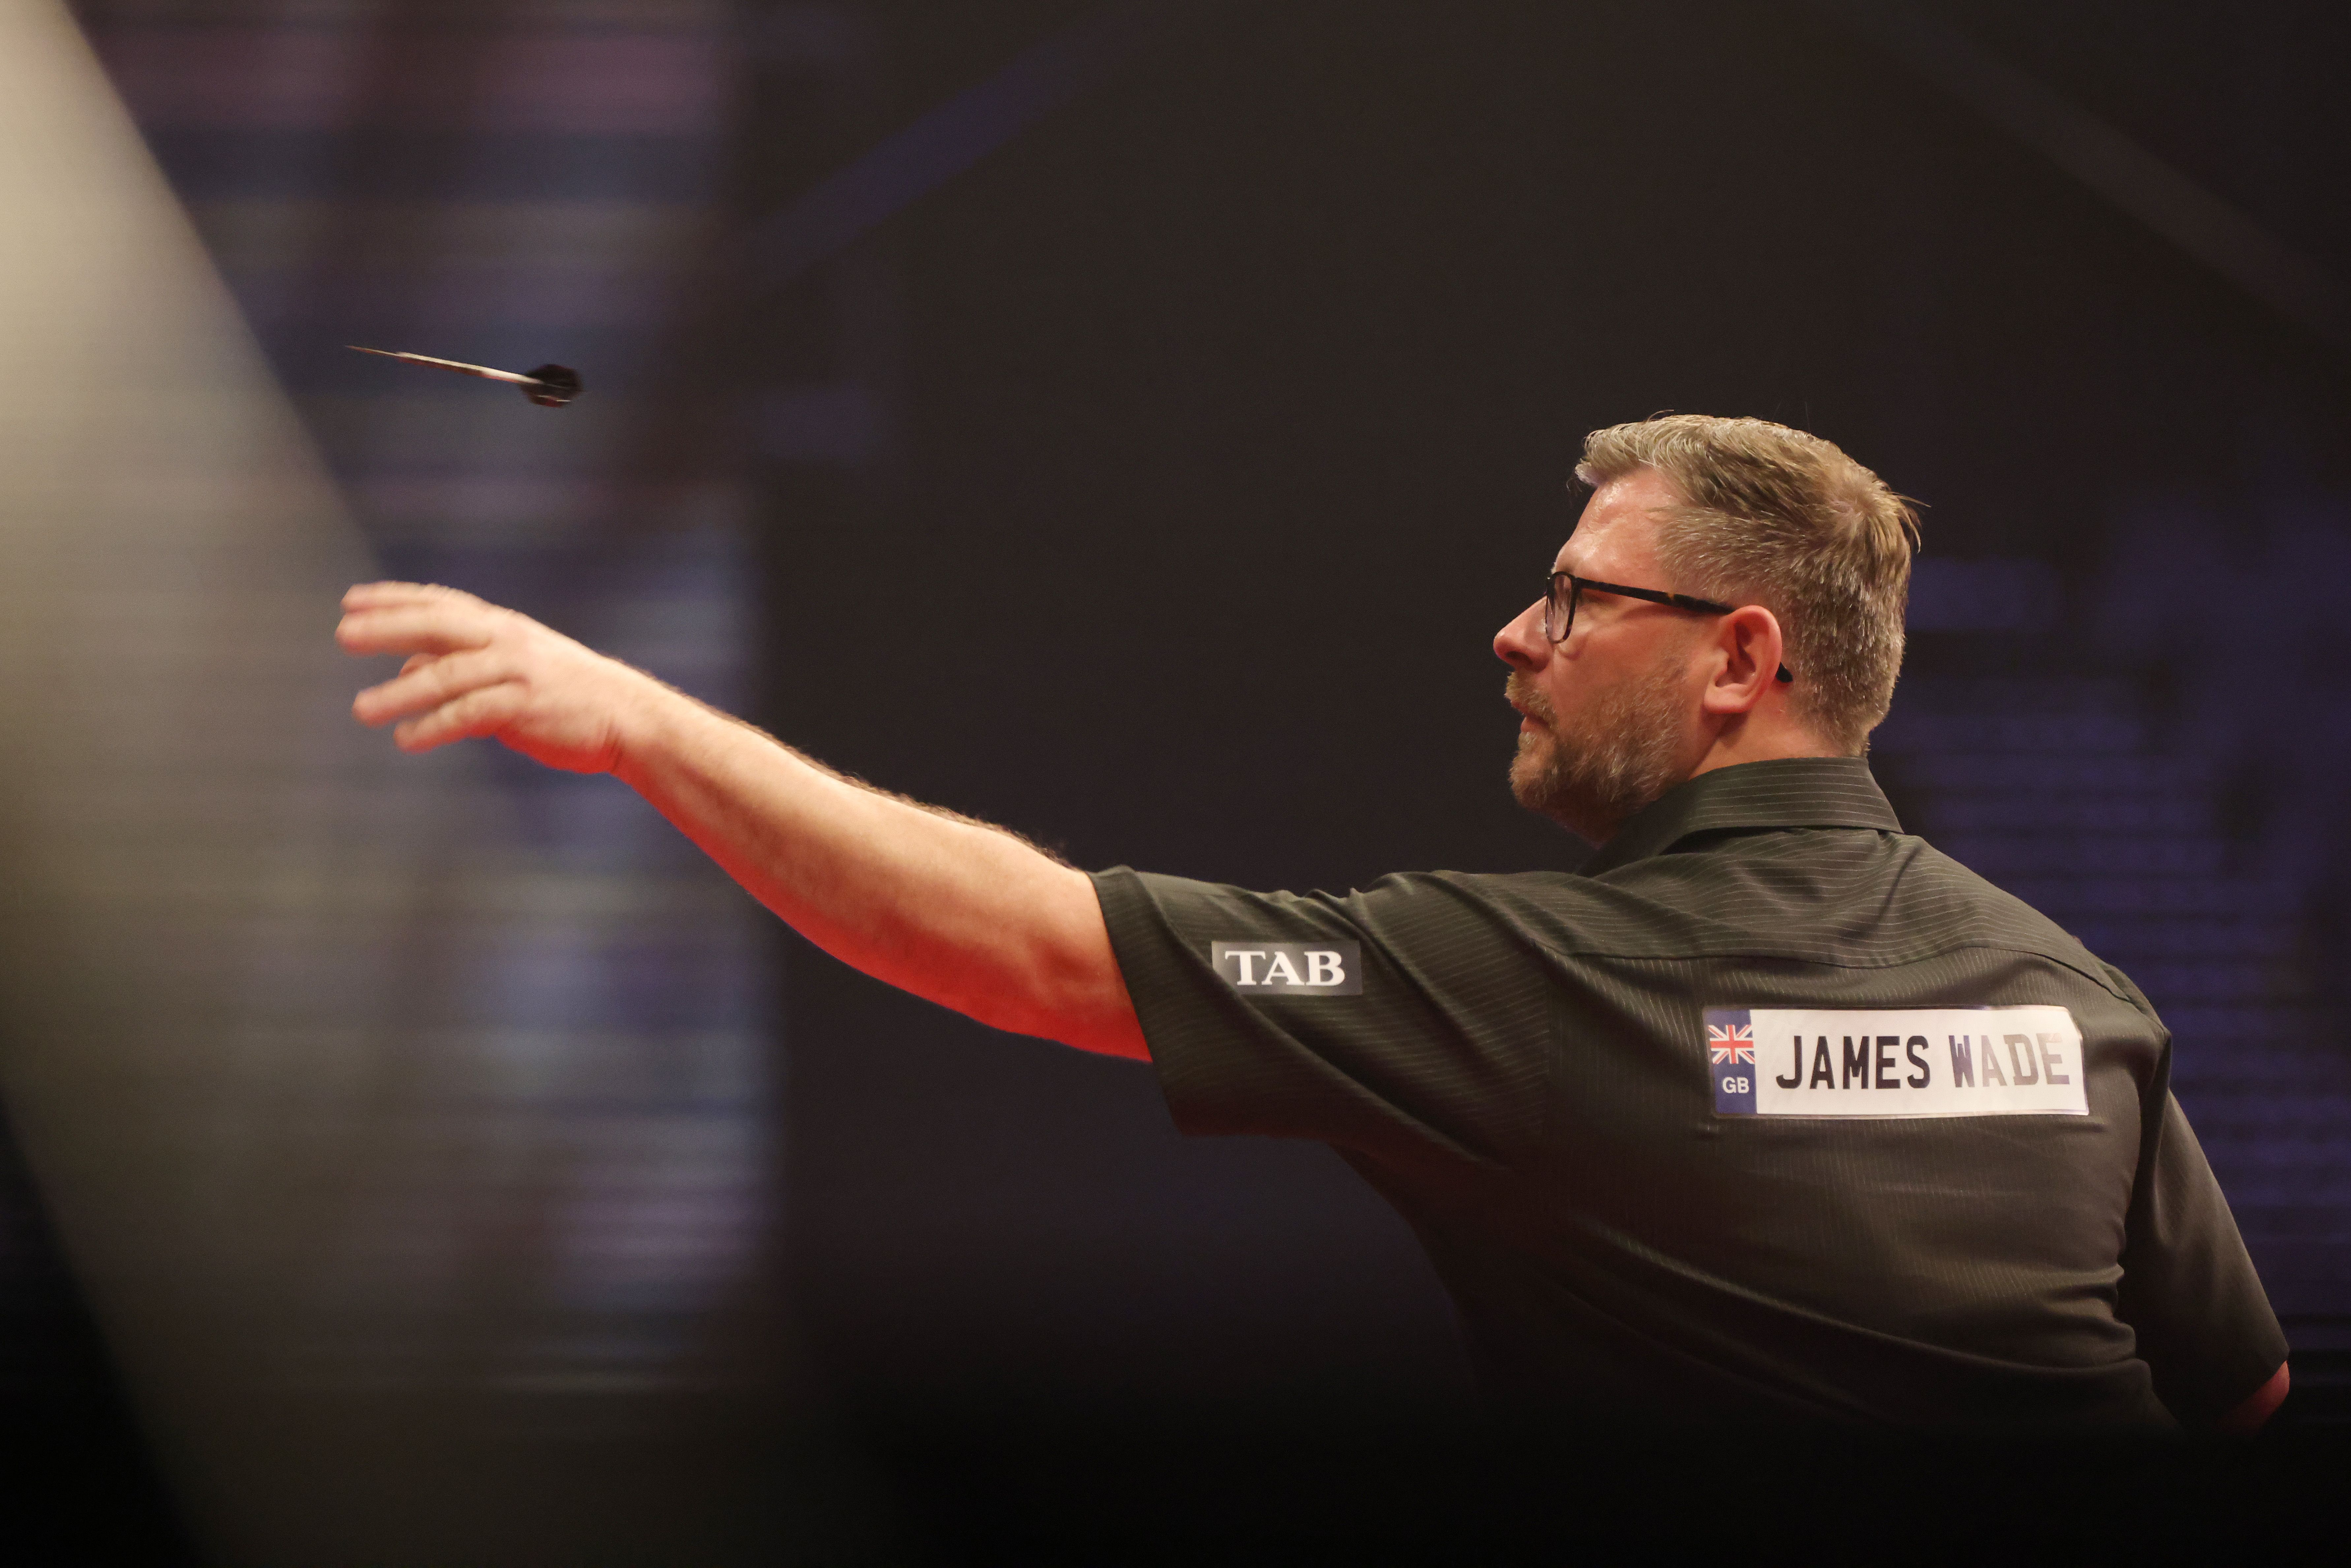 James Wade in action during the Quarter Final match between James Wade and Gerwyn Price